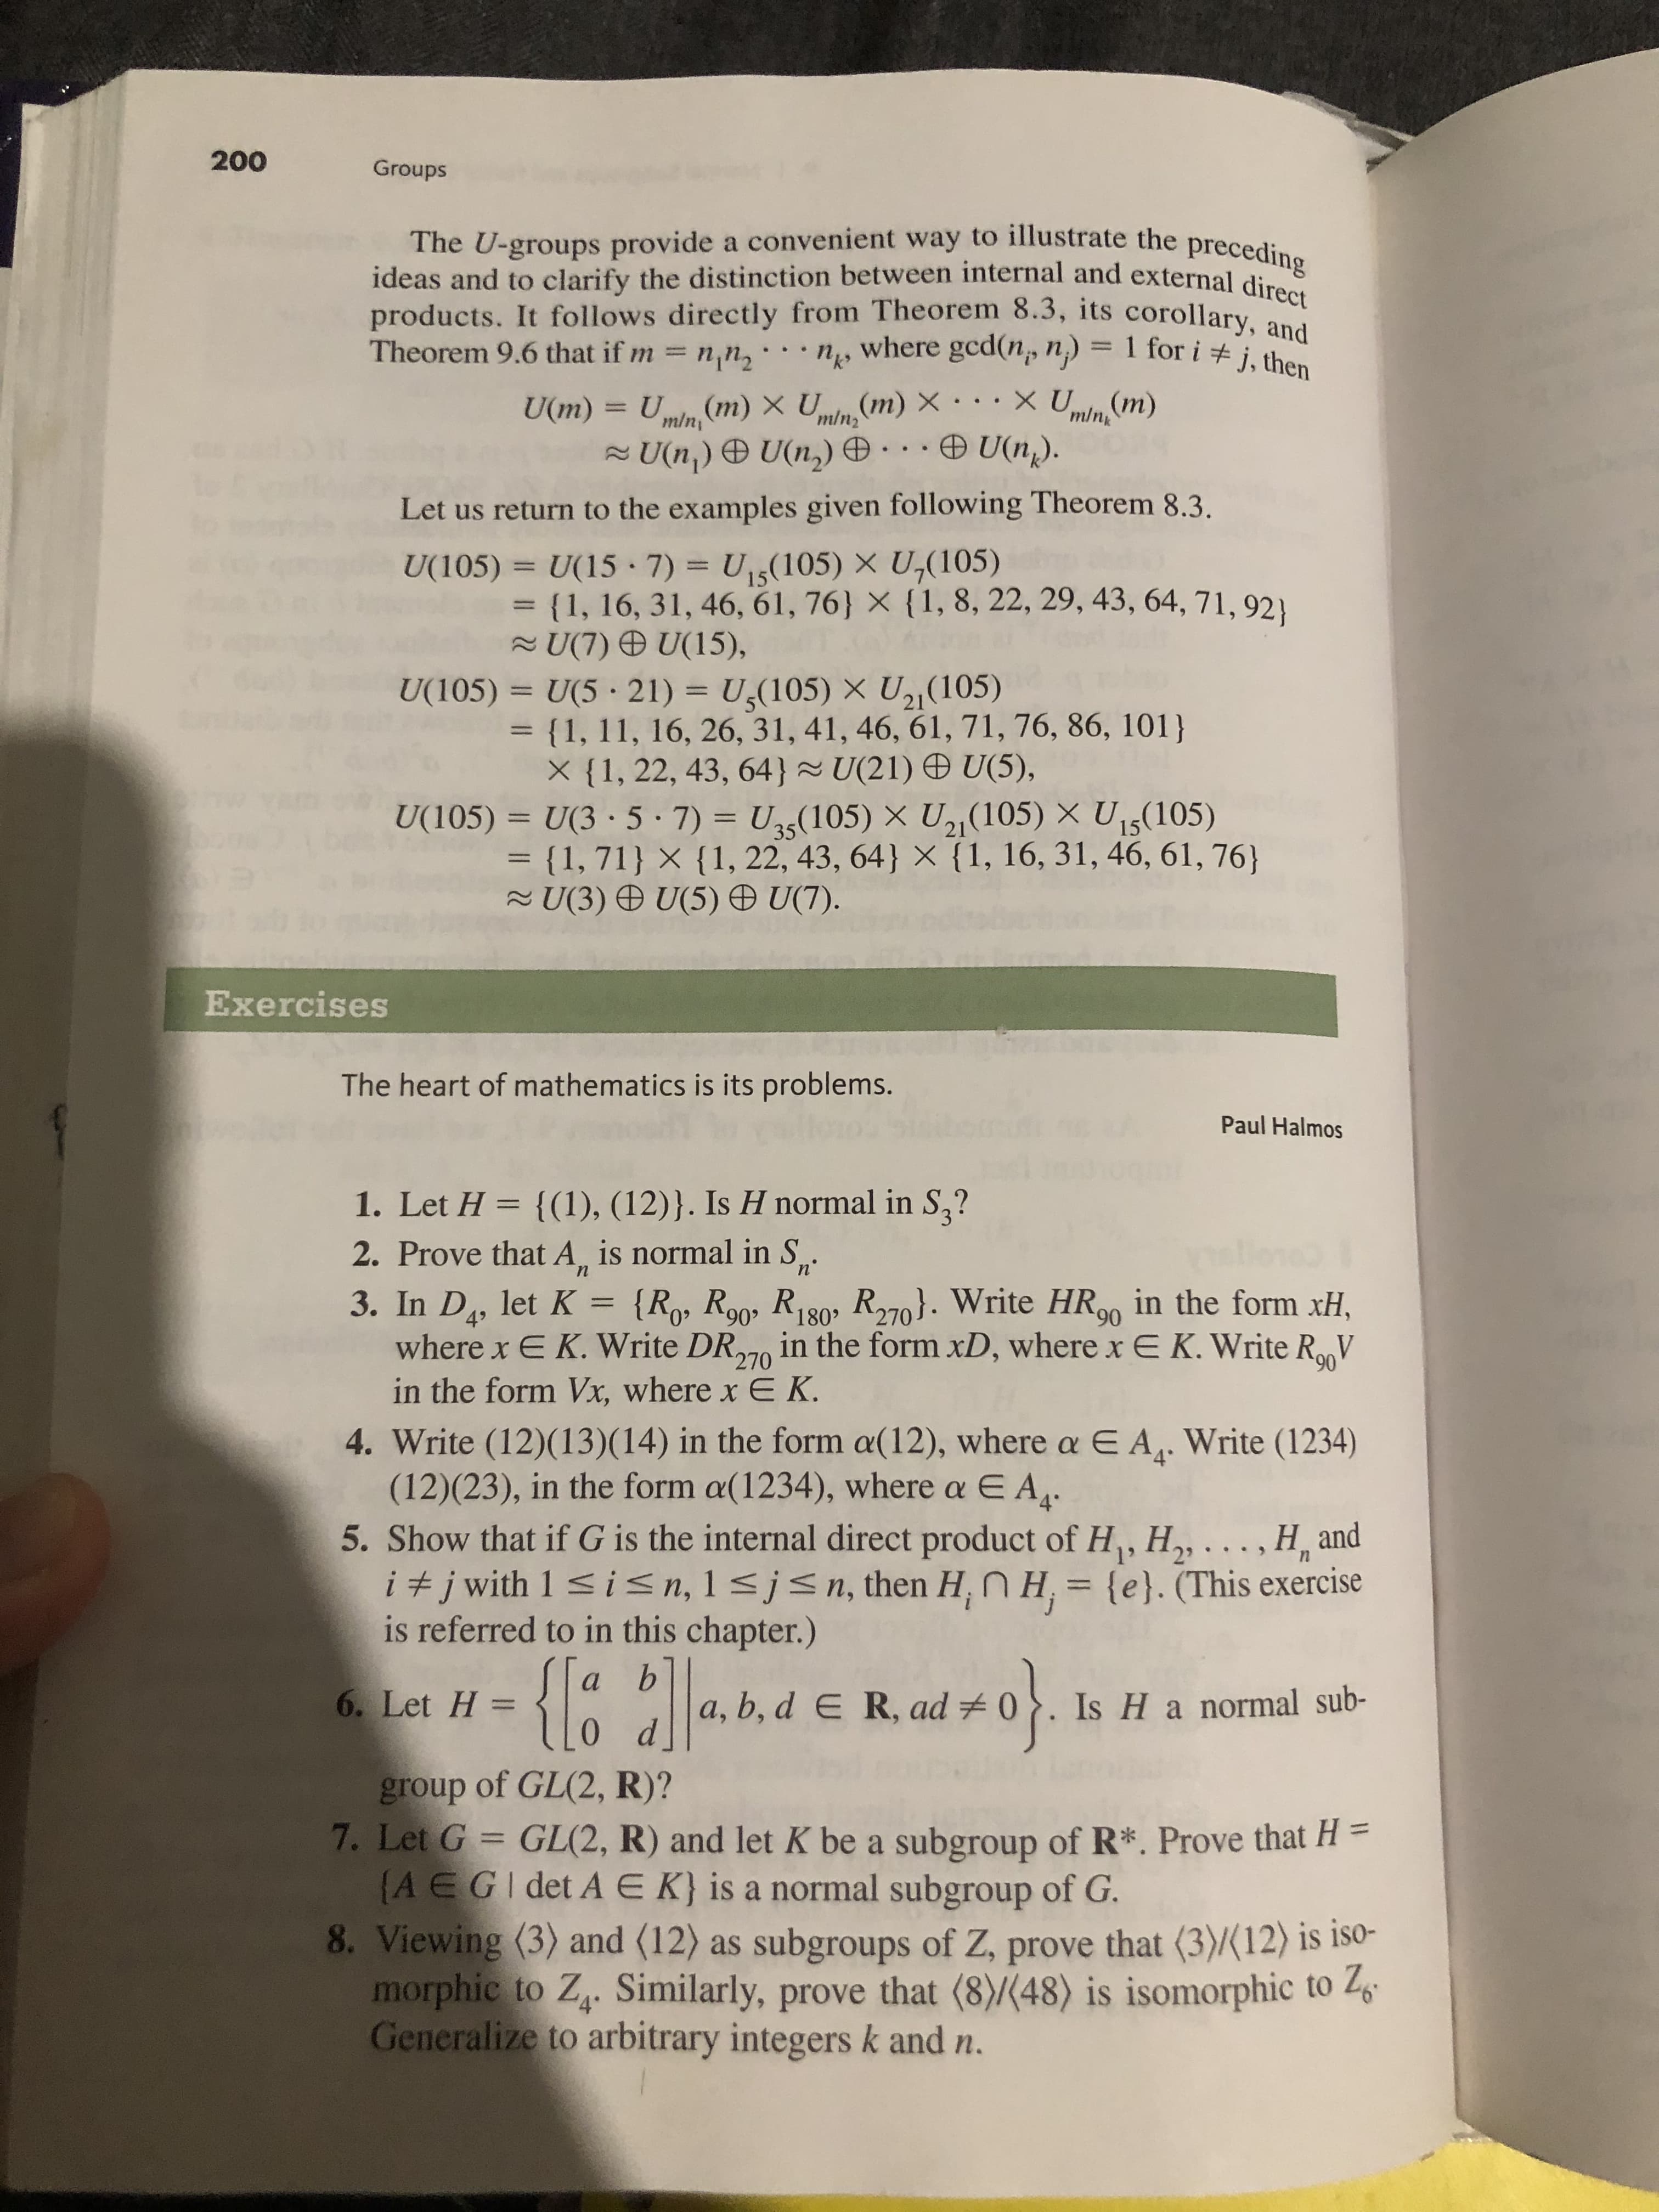 200
Groups
The U-groups provide a convenient way to illustrate the preceding
ideas and to clarify the distinction between internal and external direct
products. It follows directly from Theorem 8.3, its corollary, and
Theorem 9.6 that if m= nn2
where gcd(n, n) =
1 for i # j, then
XU(m)
(m) X U(m) X
m/n
U(m) = U
U(n) U(n)
mln
minz
U(n).
Let us return to the examples given following Theorem 8.3
U15(105) X U,(105)
U(105)
U(15 7)
= {1, 16, 31, 46, 61, 76 X {1, 8, 22, 29, 43, 64, 71, 92
U(7) U(15),
U,(105) X U21 (105)
U(105)
U(5 21)
= {1, 11, 16, 26, 31, 41, 46, 61, 71, 76, 86, 101)
X {1, 22, 43, 64 U(21) U(5),
U(3 5 7)
= {1, 71} X {1, 22, 43, 64} X {1, 16, 31, 46, 61, 76}
2U(3 ) U(5) U(7).
U5(105) X U2 (105) X U5(105)
U(105)
Exercises
The heart of mathematics is its problems.
Paul Halmos
1. Let H = {(1), (12)}. Is H normal in S,?
2. Prove that A, is normal in S
п'
n
3. In D, let K
where x E K. Write DR, in the form xD, where x E K. Write RV
in the form Vx, where x E K
{Ro, R90, R180 R270. Write HR9 in the form xH
=
,
270
4. Write (12)(13)(14) in the form a(12), where a E A. Write (1234)
(12)(23), in the form a(1234), where a E A.
5. Show that if G is the internal direct product of H, H2, ., H and
i #j with 1 s in, 1 sjsn, then H, n H, {e}. (This exercise
is referred to in this chapter.)
a
a, b, d e R, ad 0.Is Ha normal sub-
6. Let H =
group of GL(2, R)?
7. Let G GL(2, R) and let K be a subgroup of R*. Prove that H =
(A EGI det A E K} is a normal subgroup of G.
8. Viewing (3) and (12) as subgroups of Z, prove that (3)(12) is iso-
morphic to Z. Similarly, prove that (8)/(48) is isomorphic to 2
Generalize to arbitrary integers k and n.
